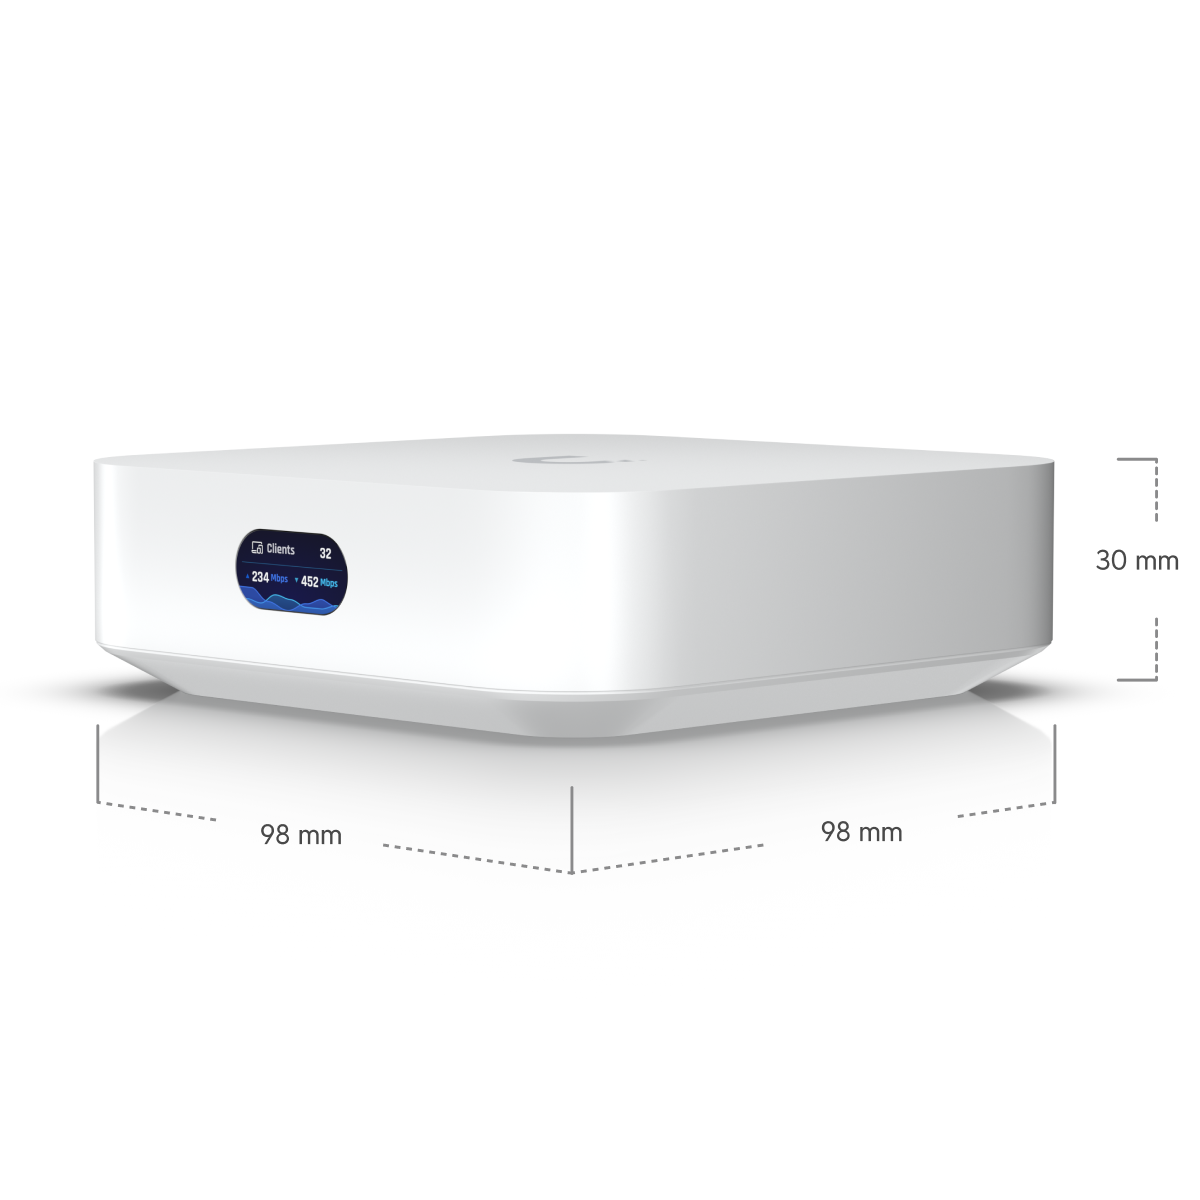 Unifi Express : Can it be a travel router? Site magic? IDS/IPS? 